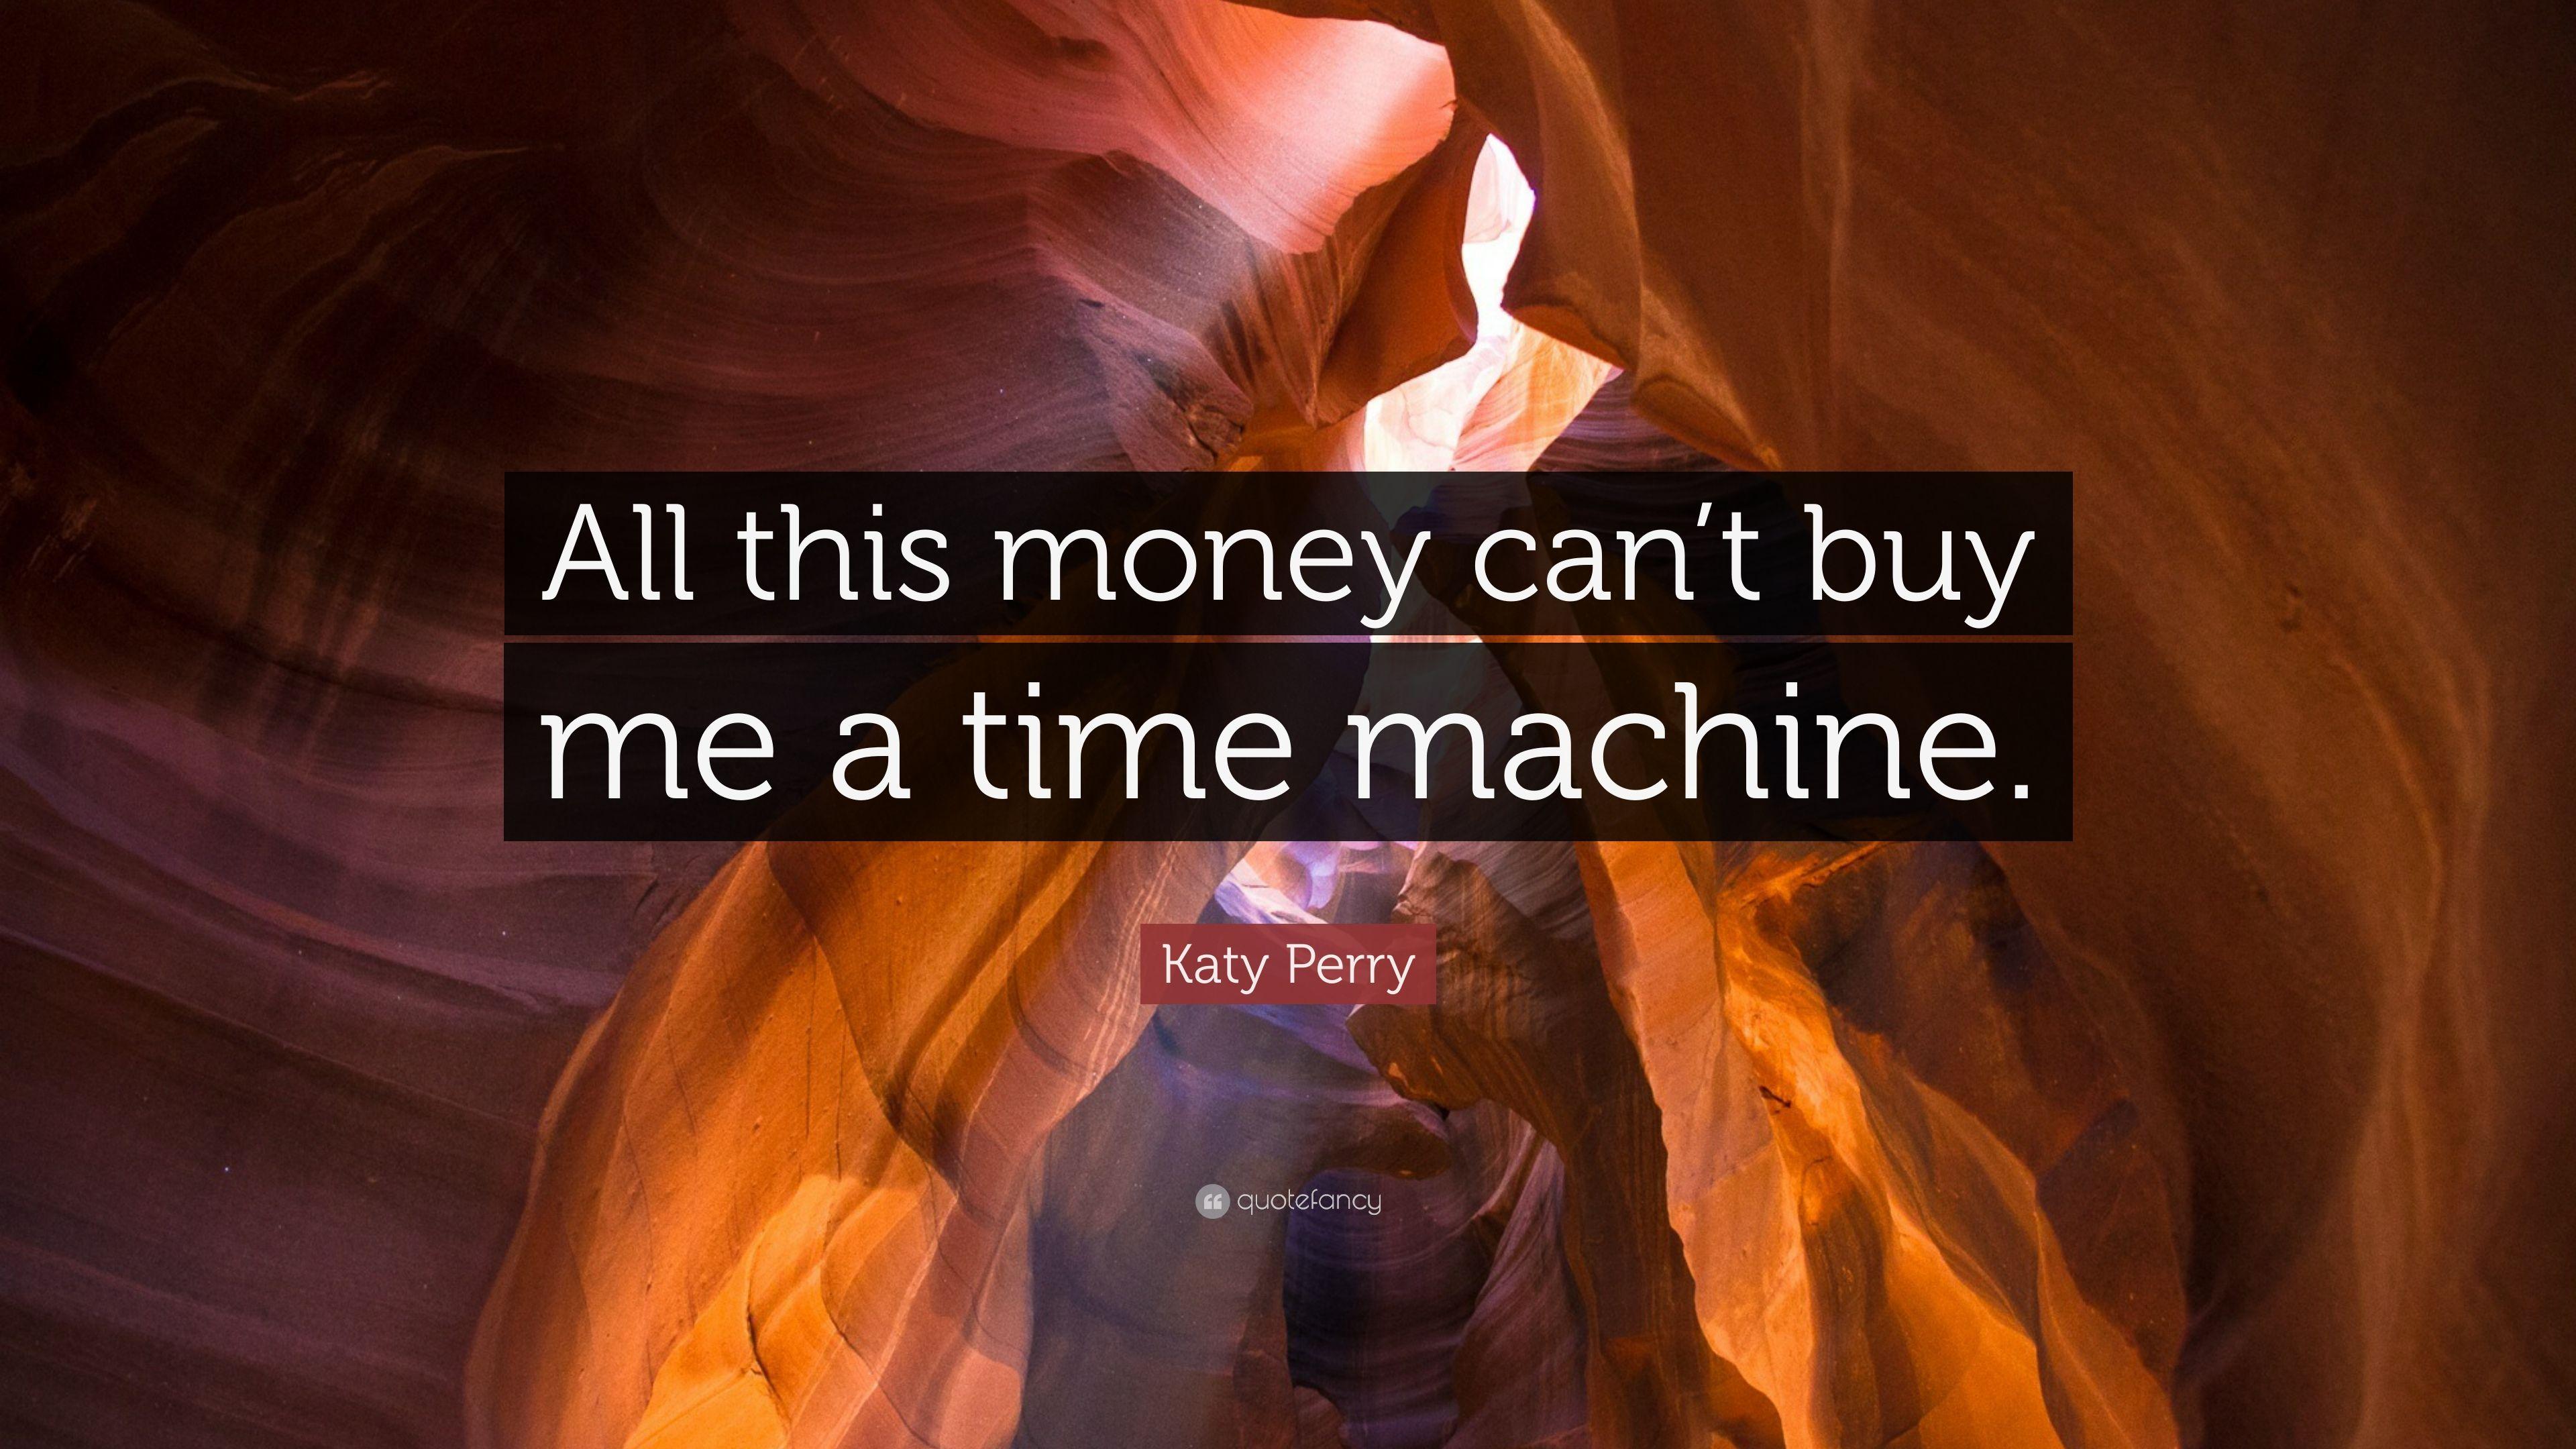 Katy Perry Quote: “All this money can't buy me a time machine